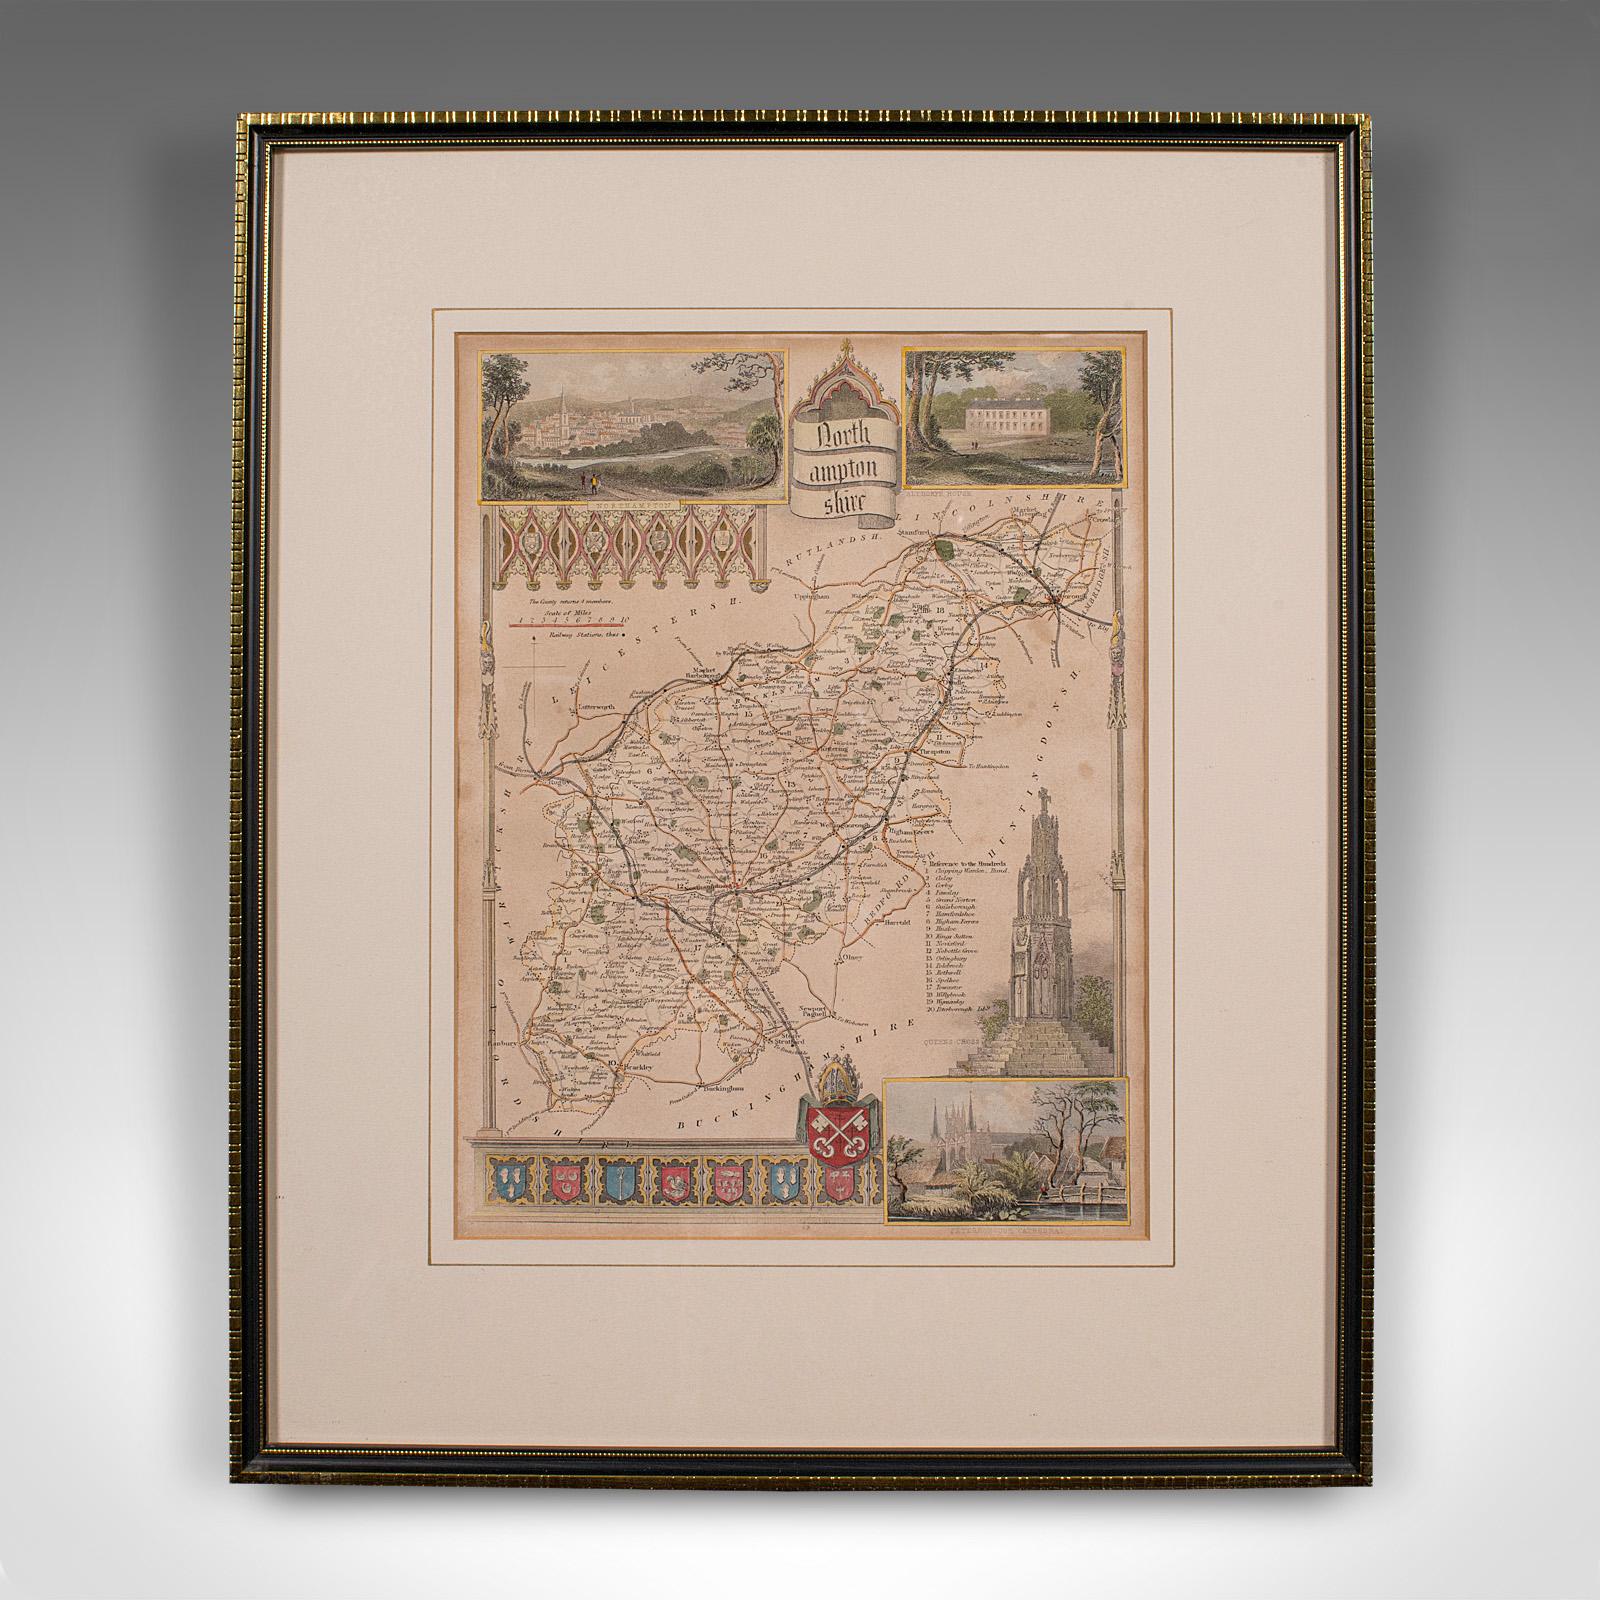 This is an antique lithography map of Northamptonshire. An English, framed atlas engraving of cartographic interest, dating to the mid 19th century and later.

Superb lithography of Northamptonshire and its county detail, perfect for